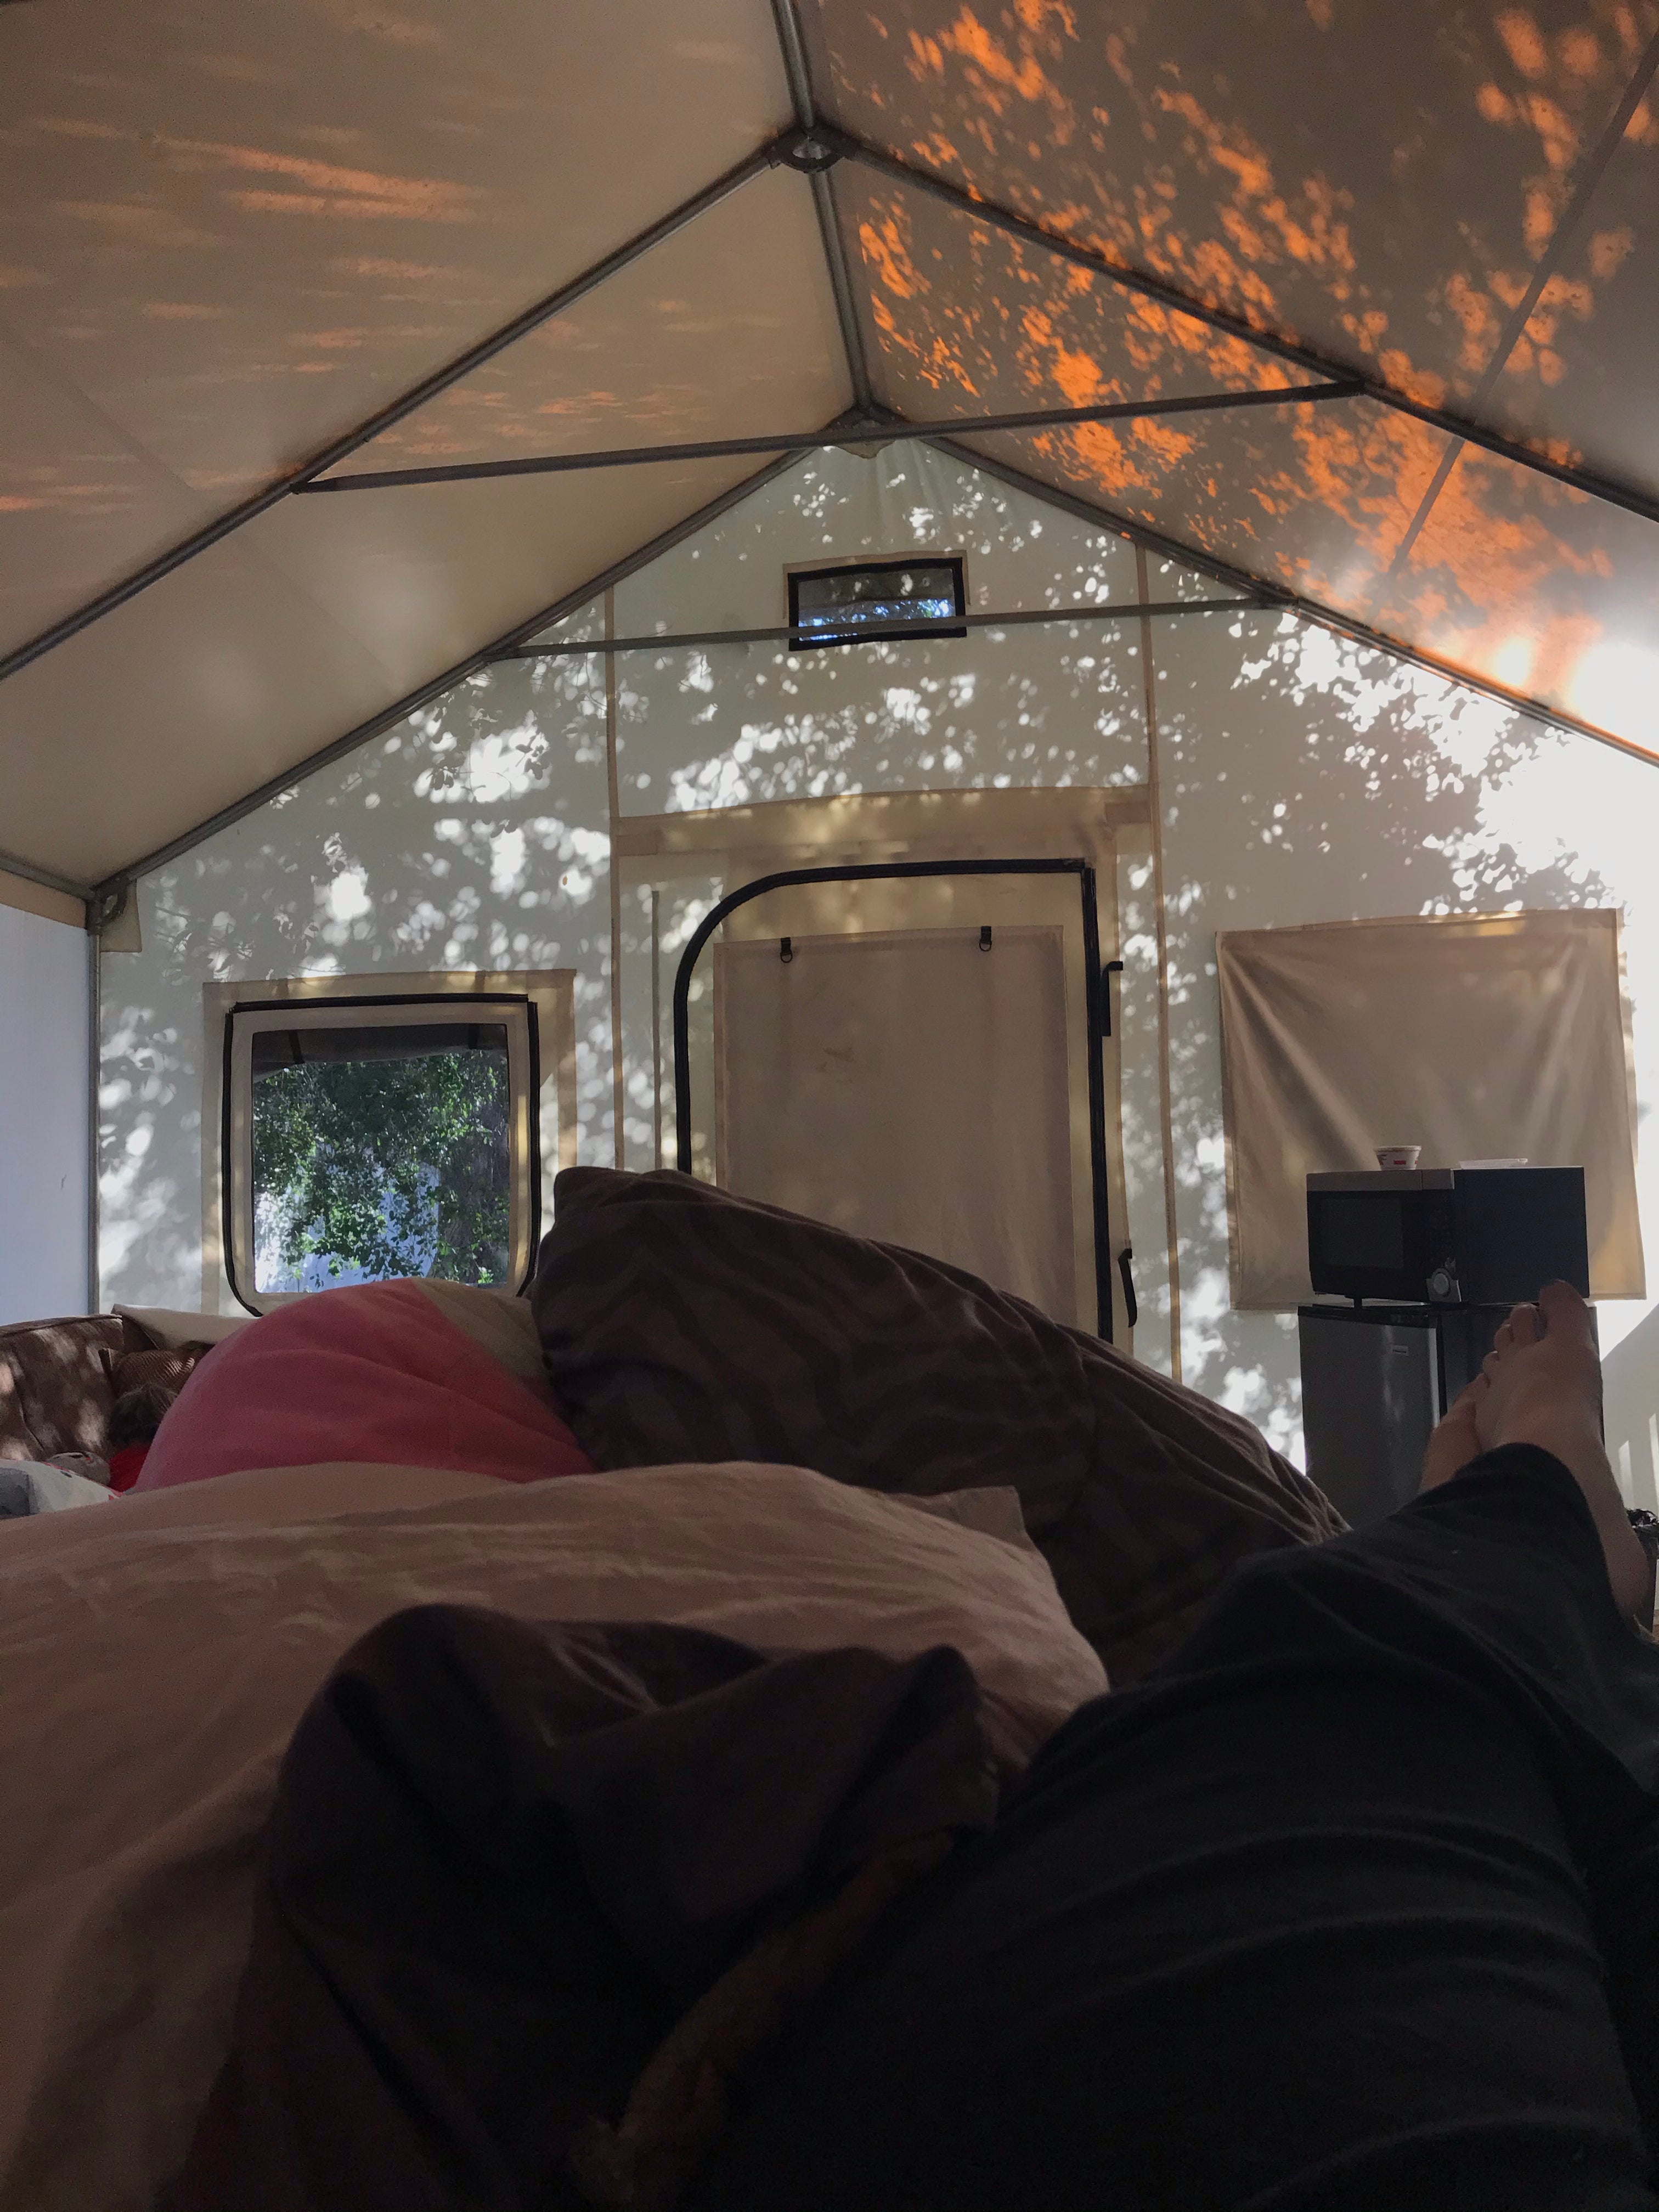 Loved the Glamping tent!